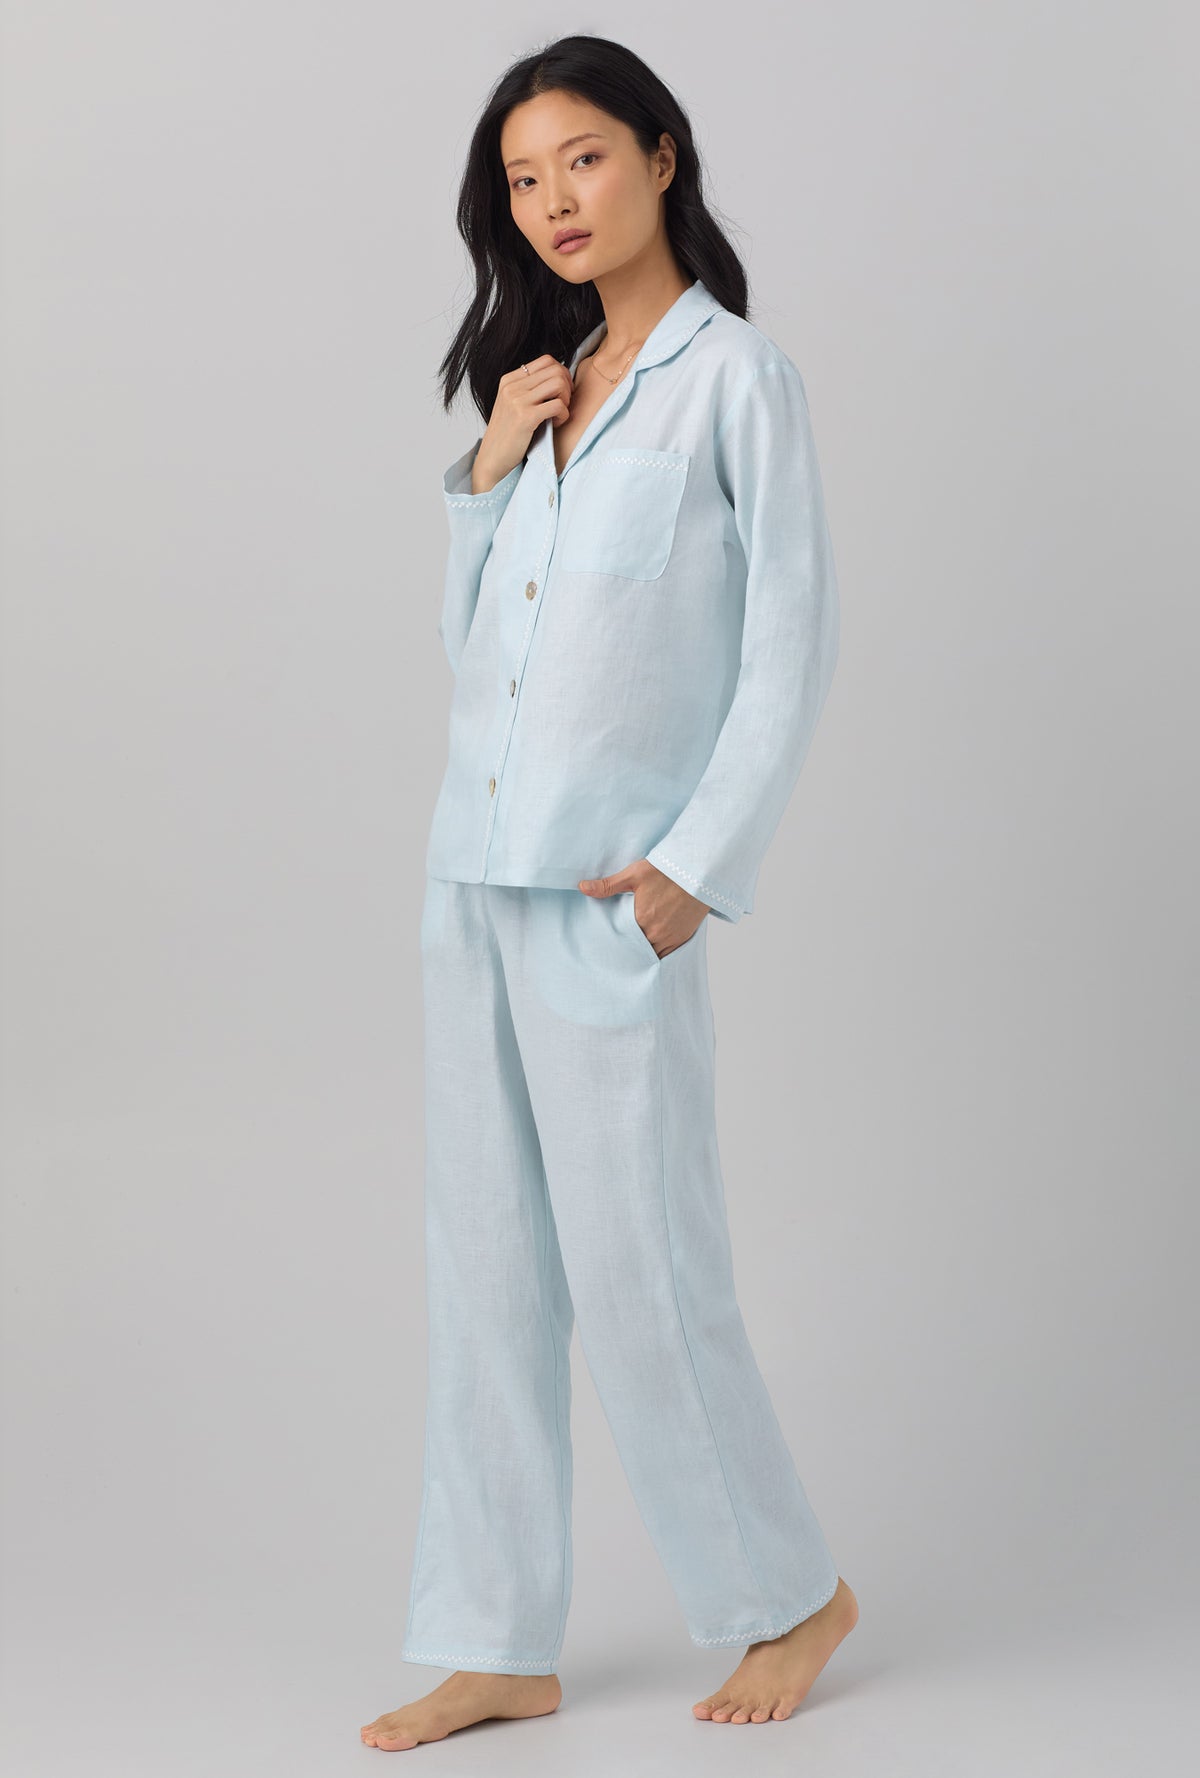 A lady wearing blue long sleeve classic linen pj set with delicate blue print.